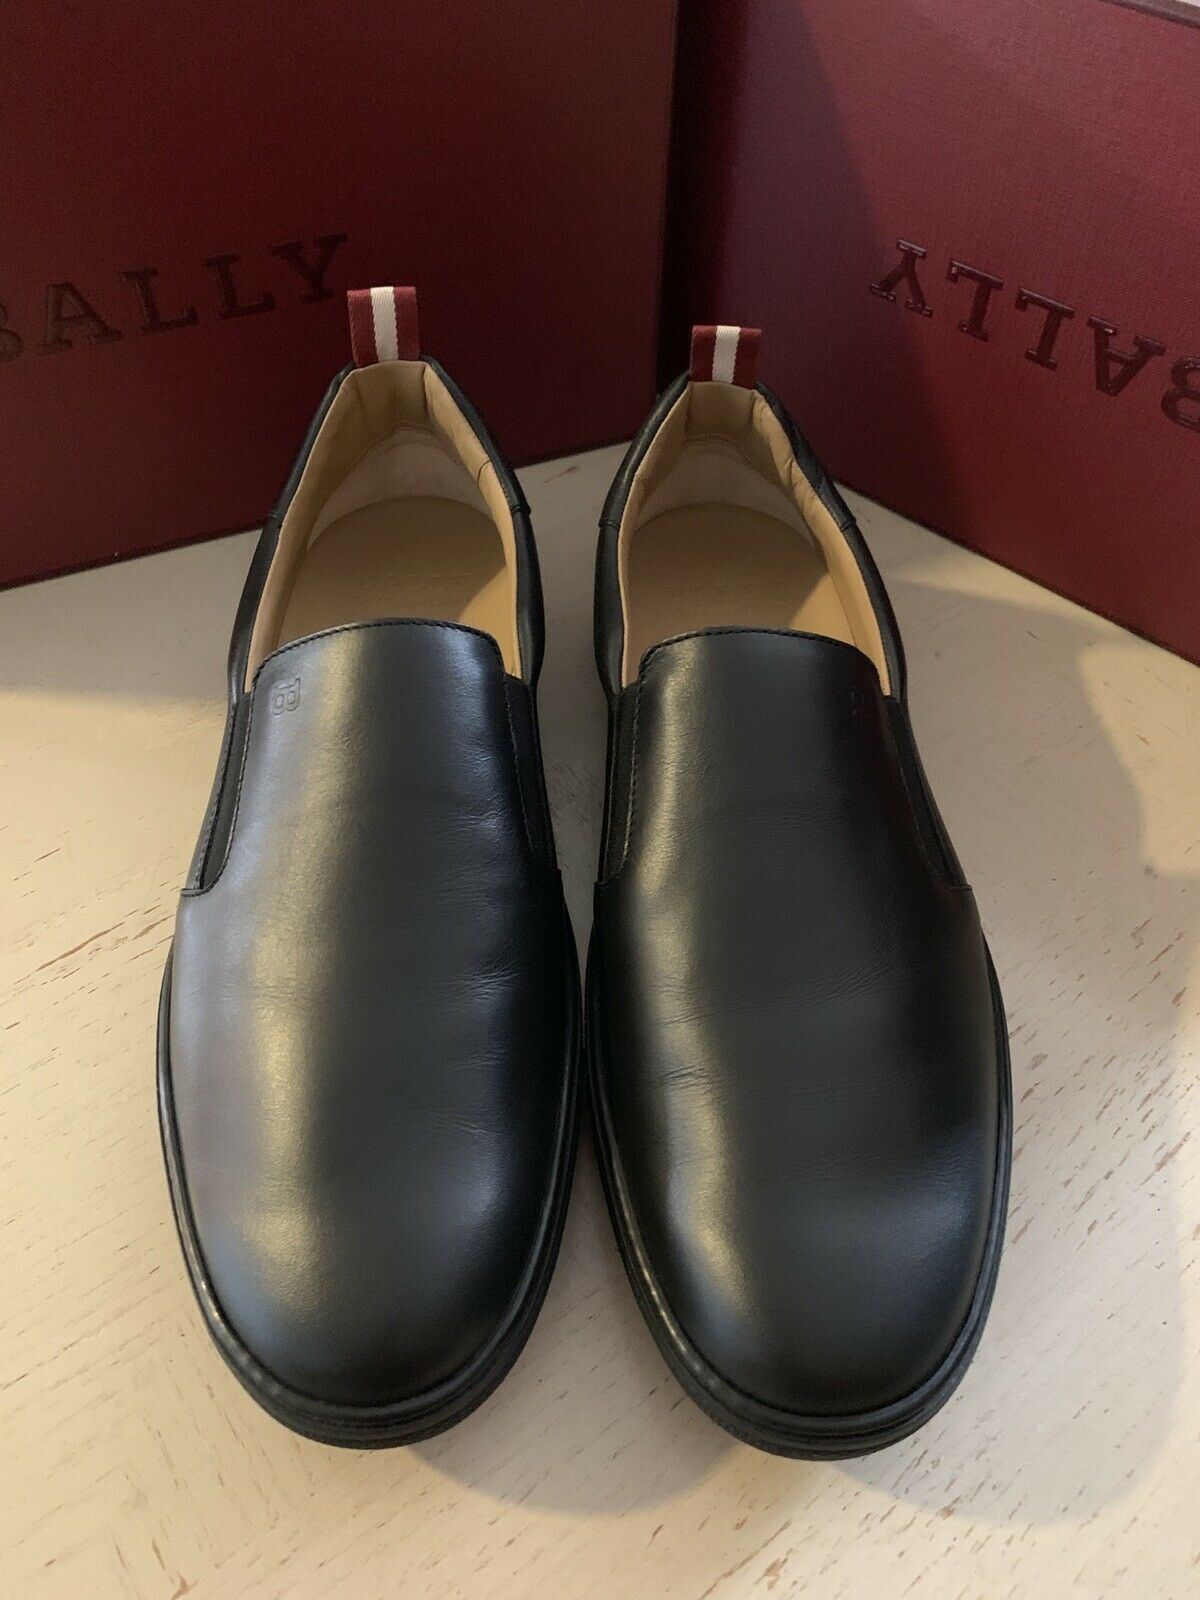 New $510 Bally Men Orniel Leather Sneakers Shoes Black 10.5 US Switzerland